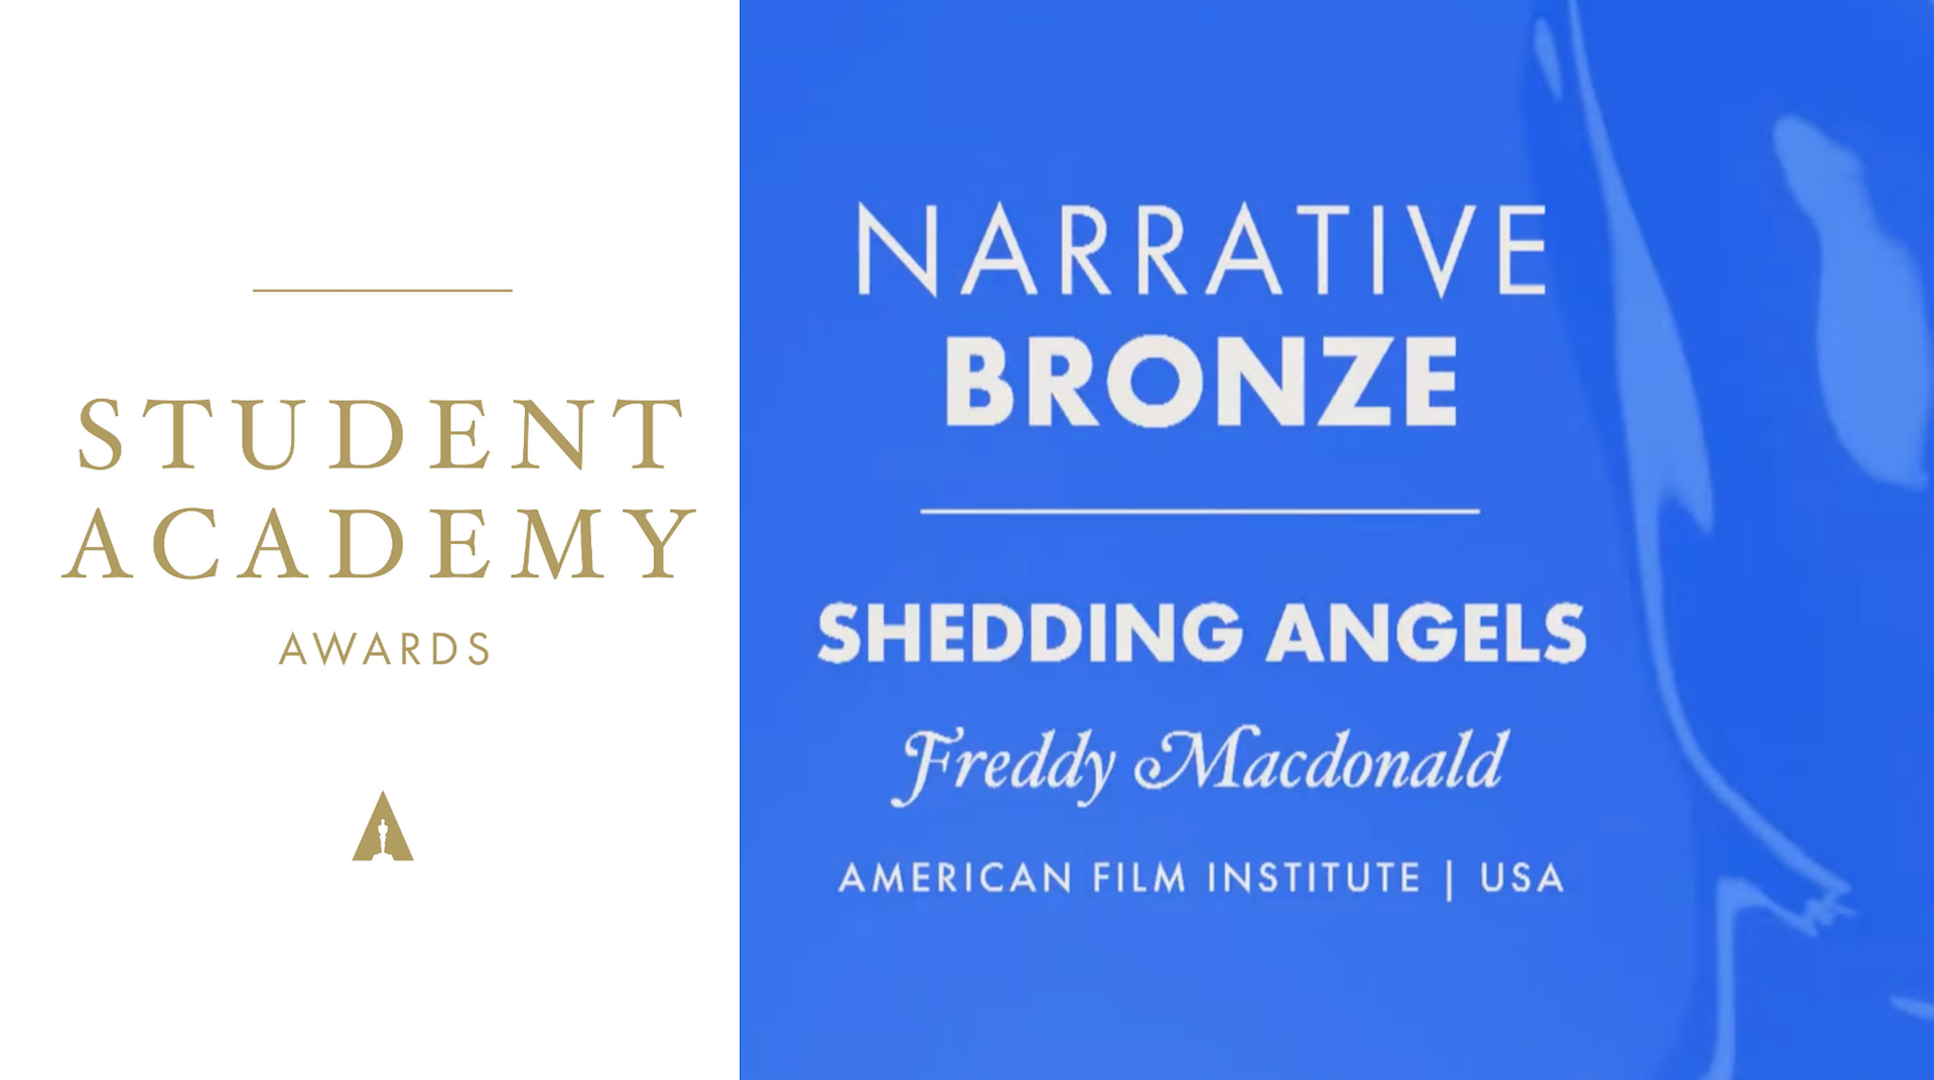 AFI Thesis Film Wins Bronze at 2022 Student Academy Awards American